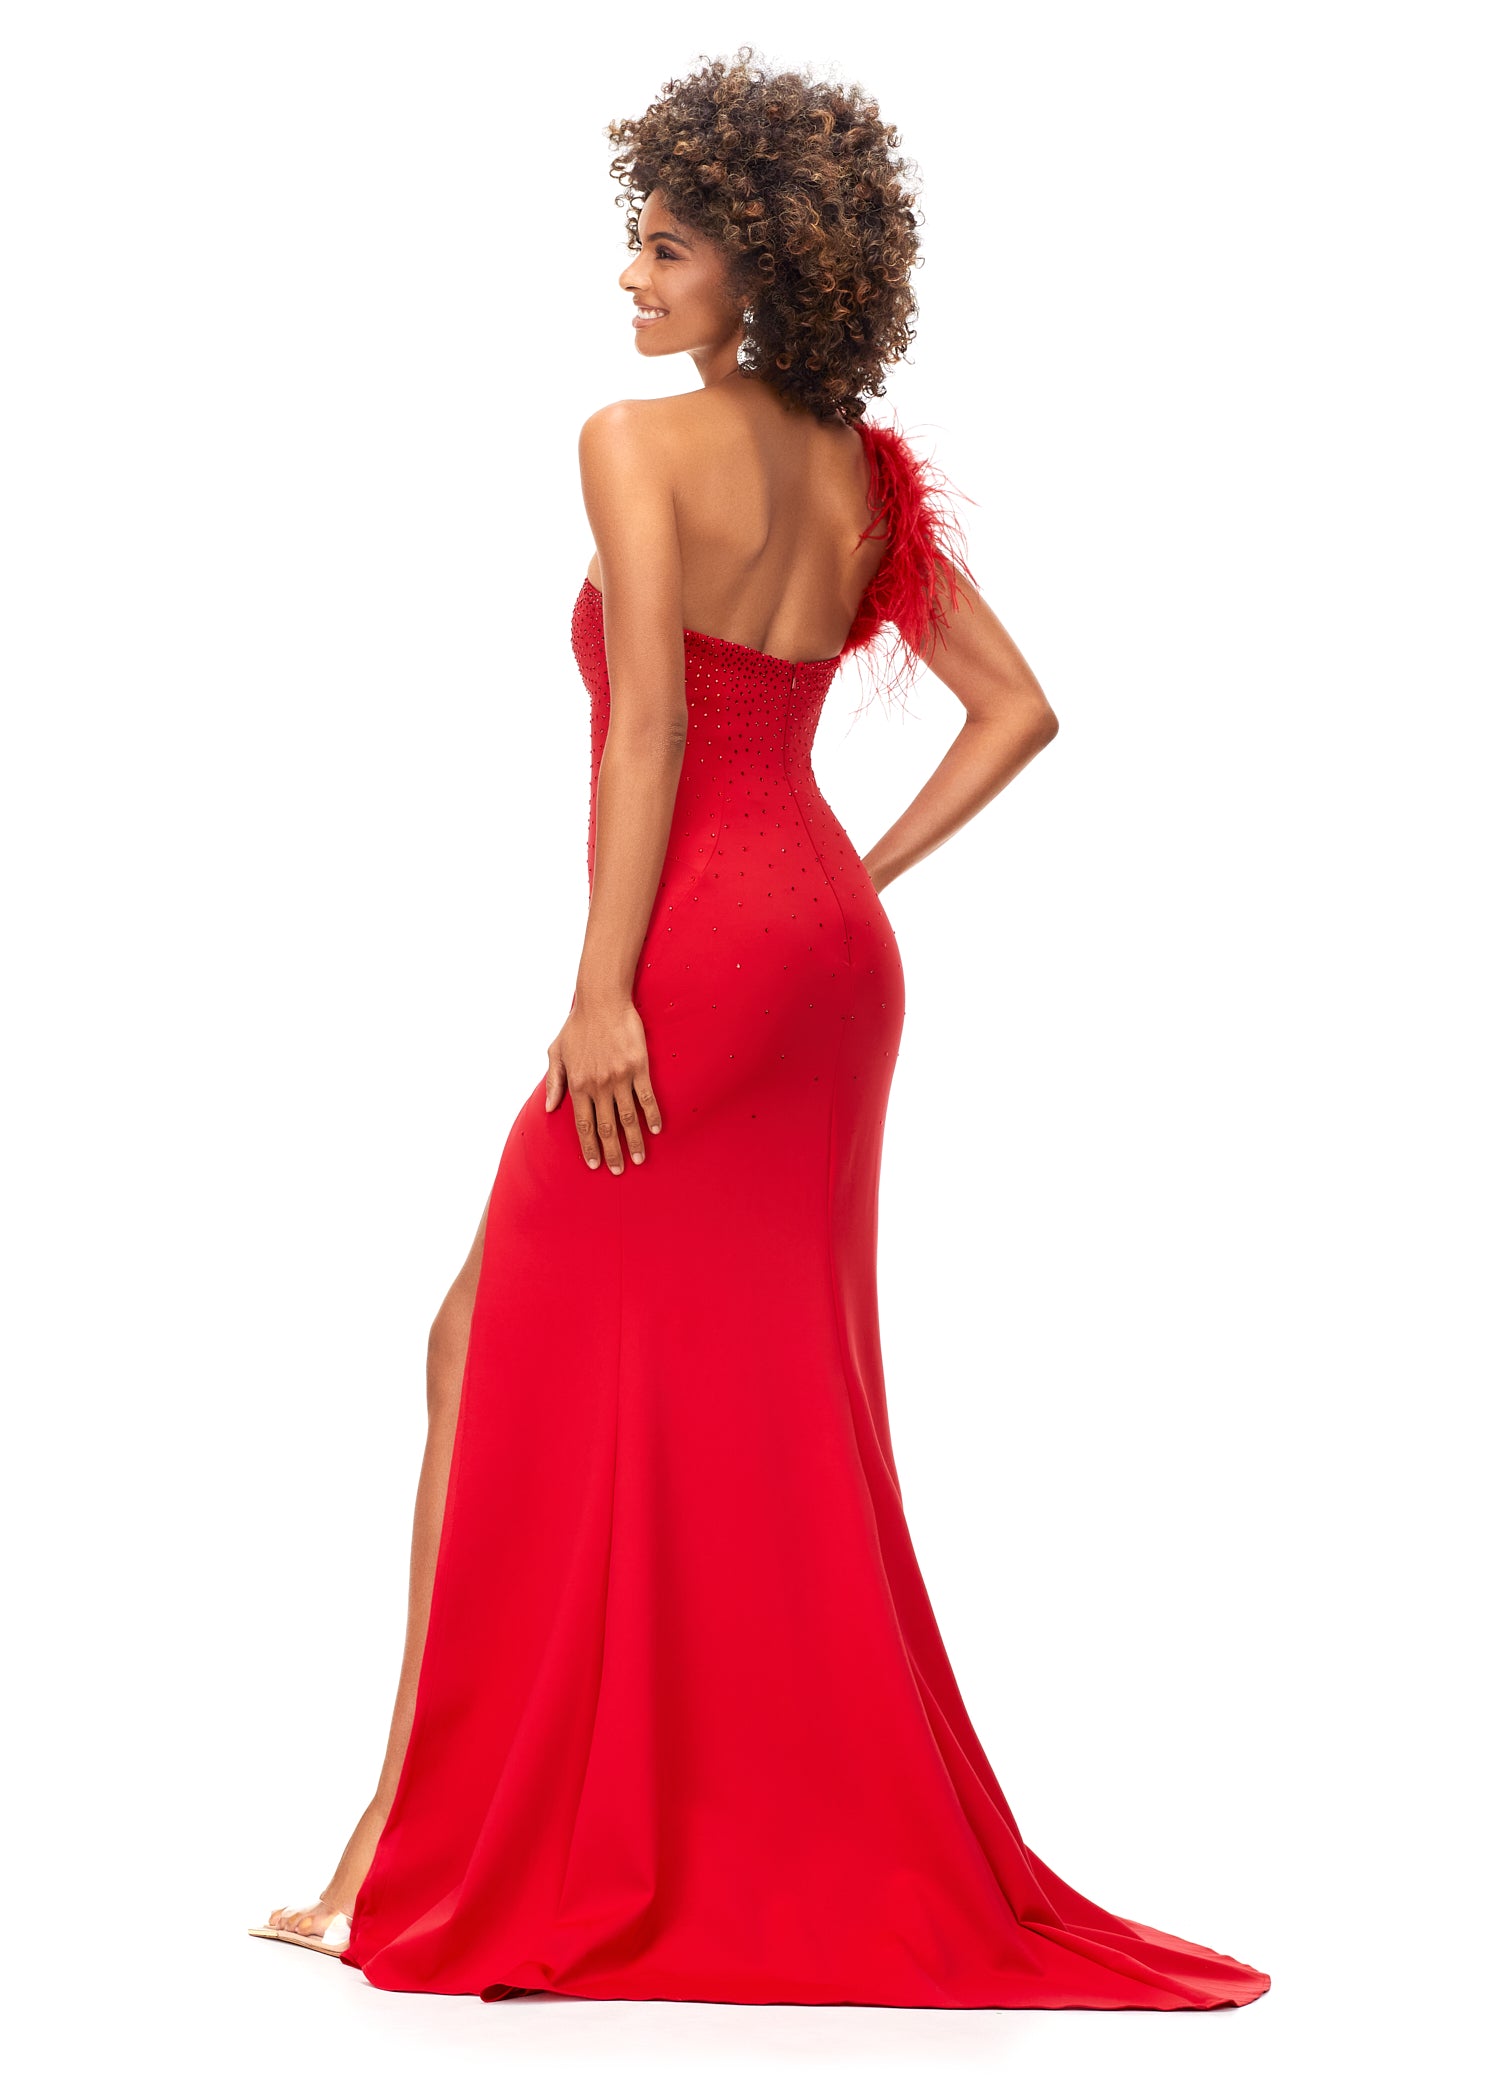 Ashley Lauren 11290 Red One Shoulder Prom Dress crystal top one shoulder with feathers Stand out in this one shoulder scuba gown. The neckline is embellished with feathers to provide a fun and flirty detail. The bodice is accented by heat set stones that cascade down on the skirt. The look is complete with a left leg slit.